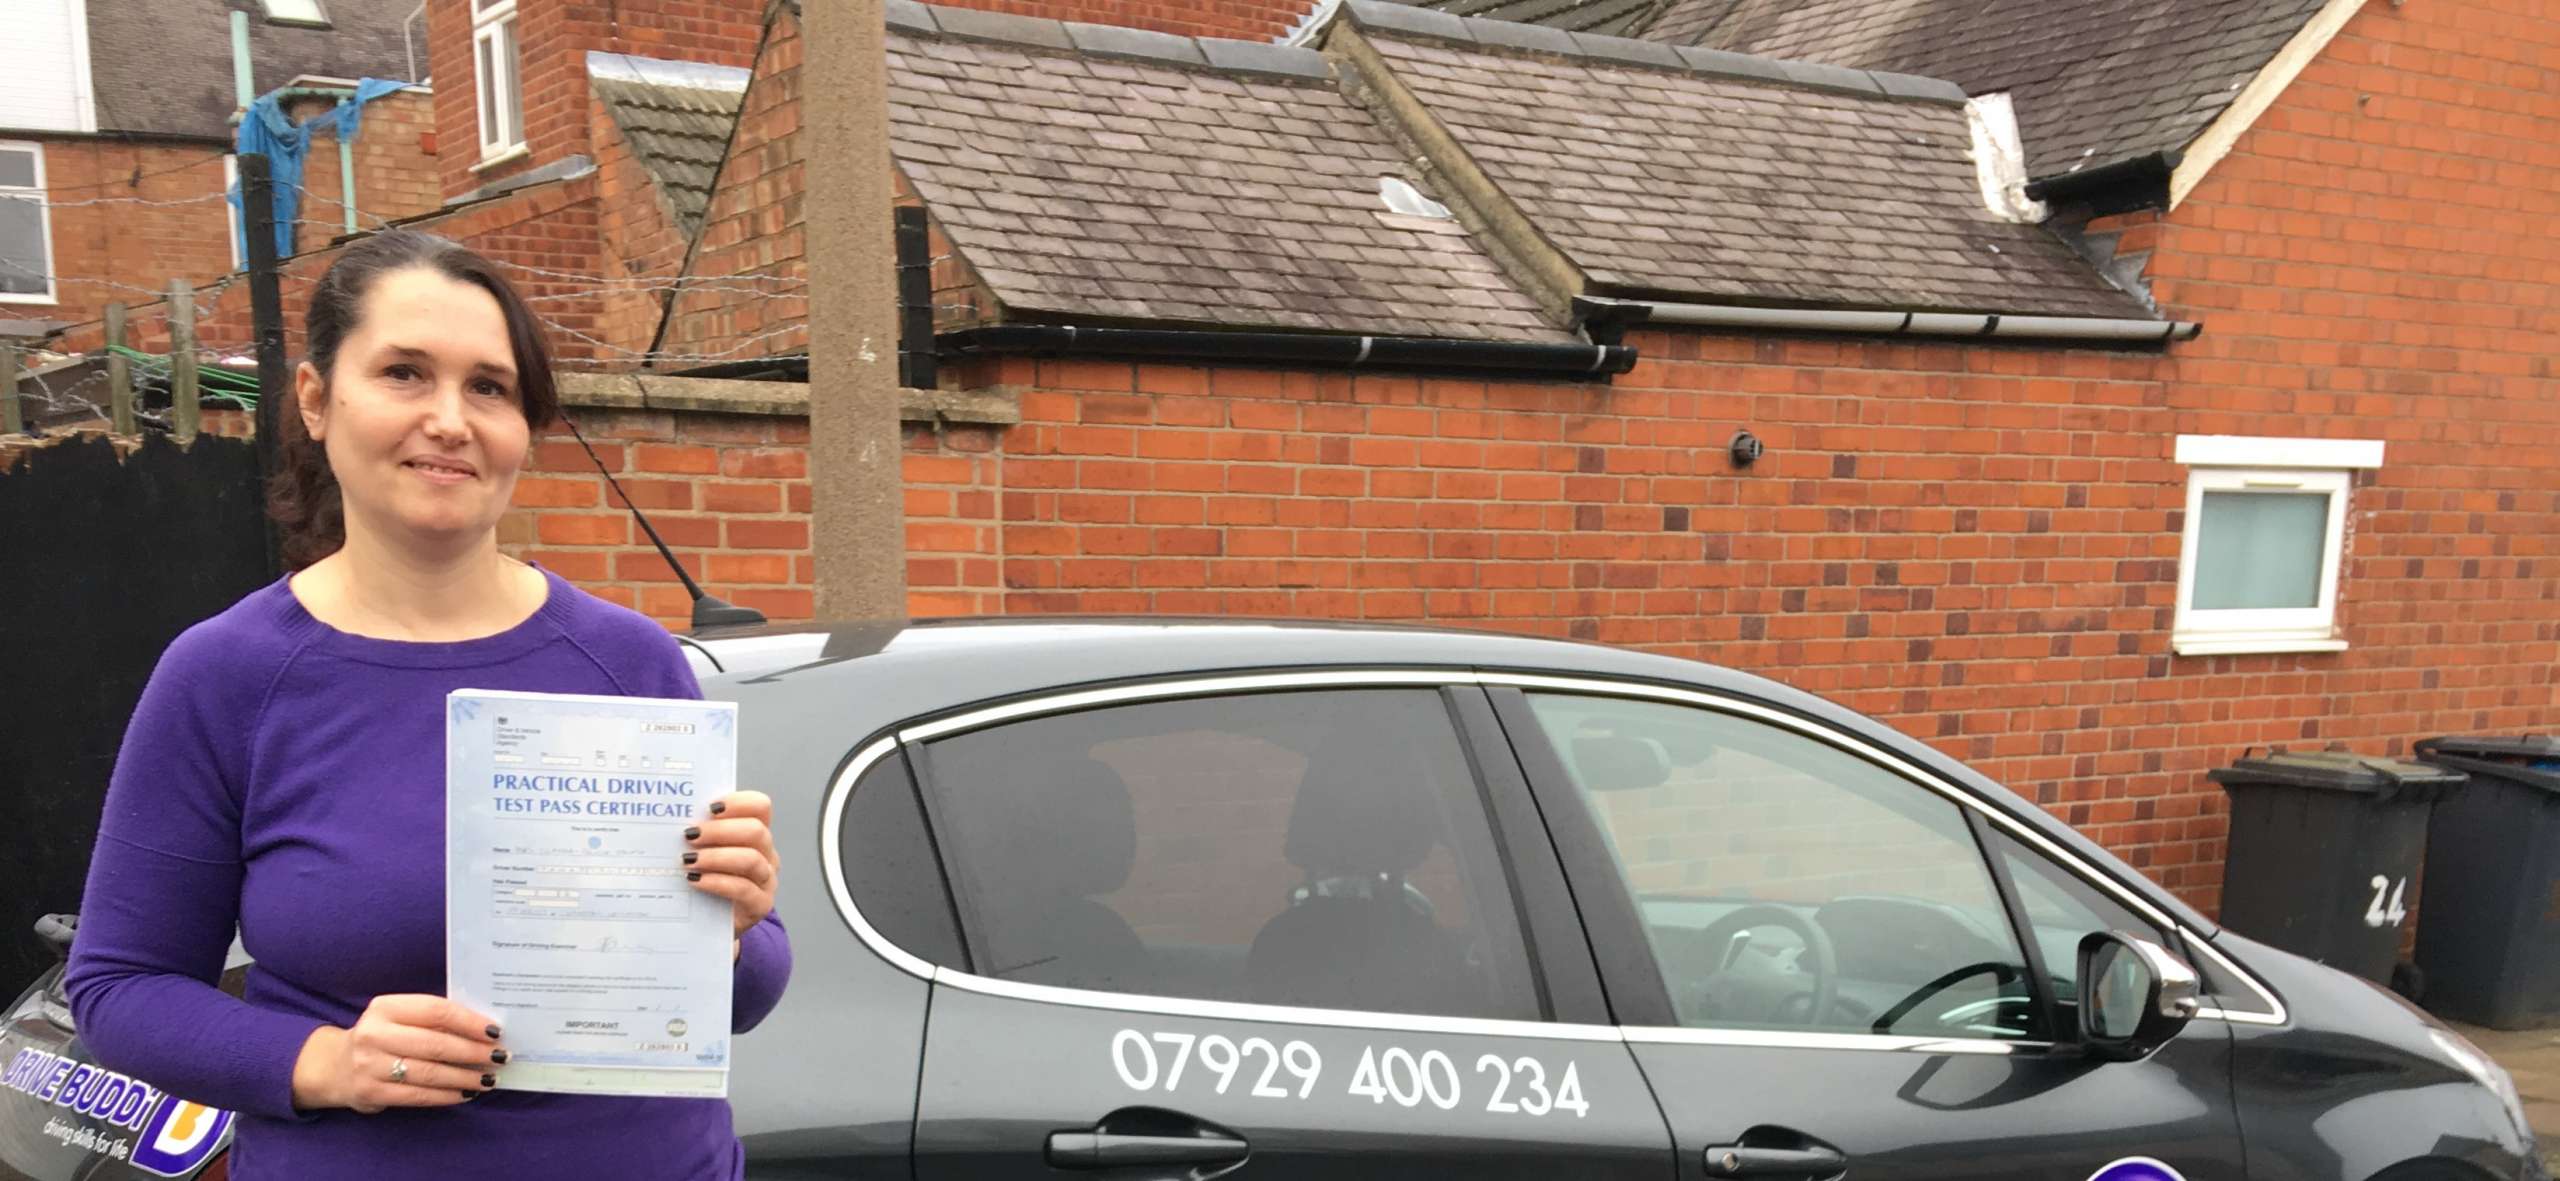 driving lessons leicester - Panchal Driving Academy - Claudia Tanase